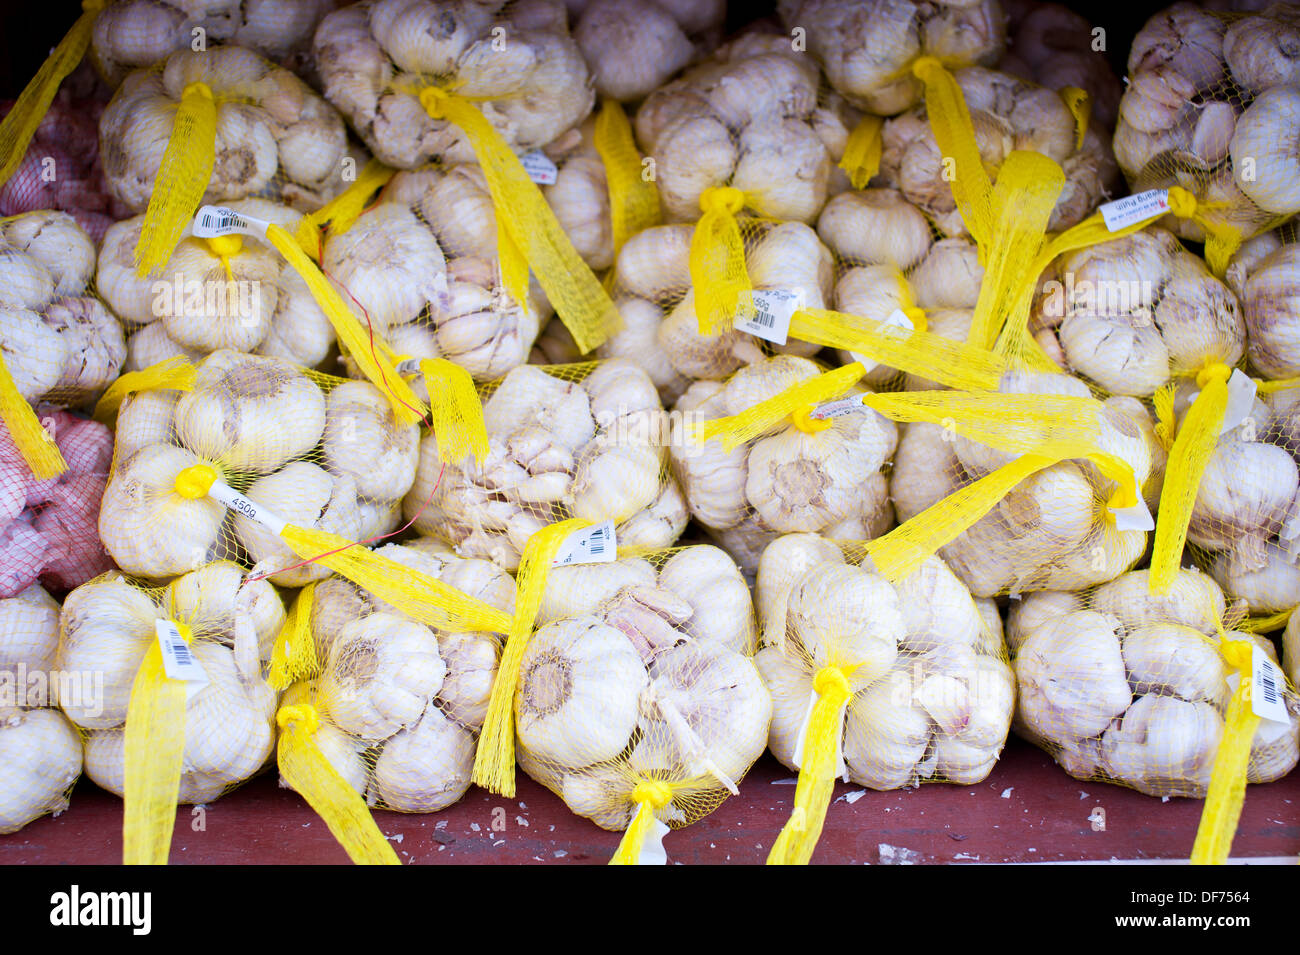 Bunches of garlic with yellow ribbon ties. Stock Photo